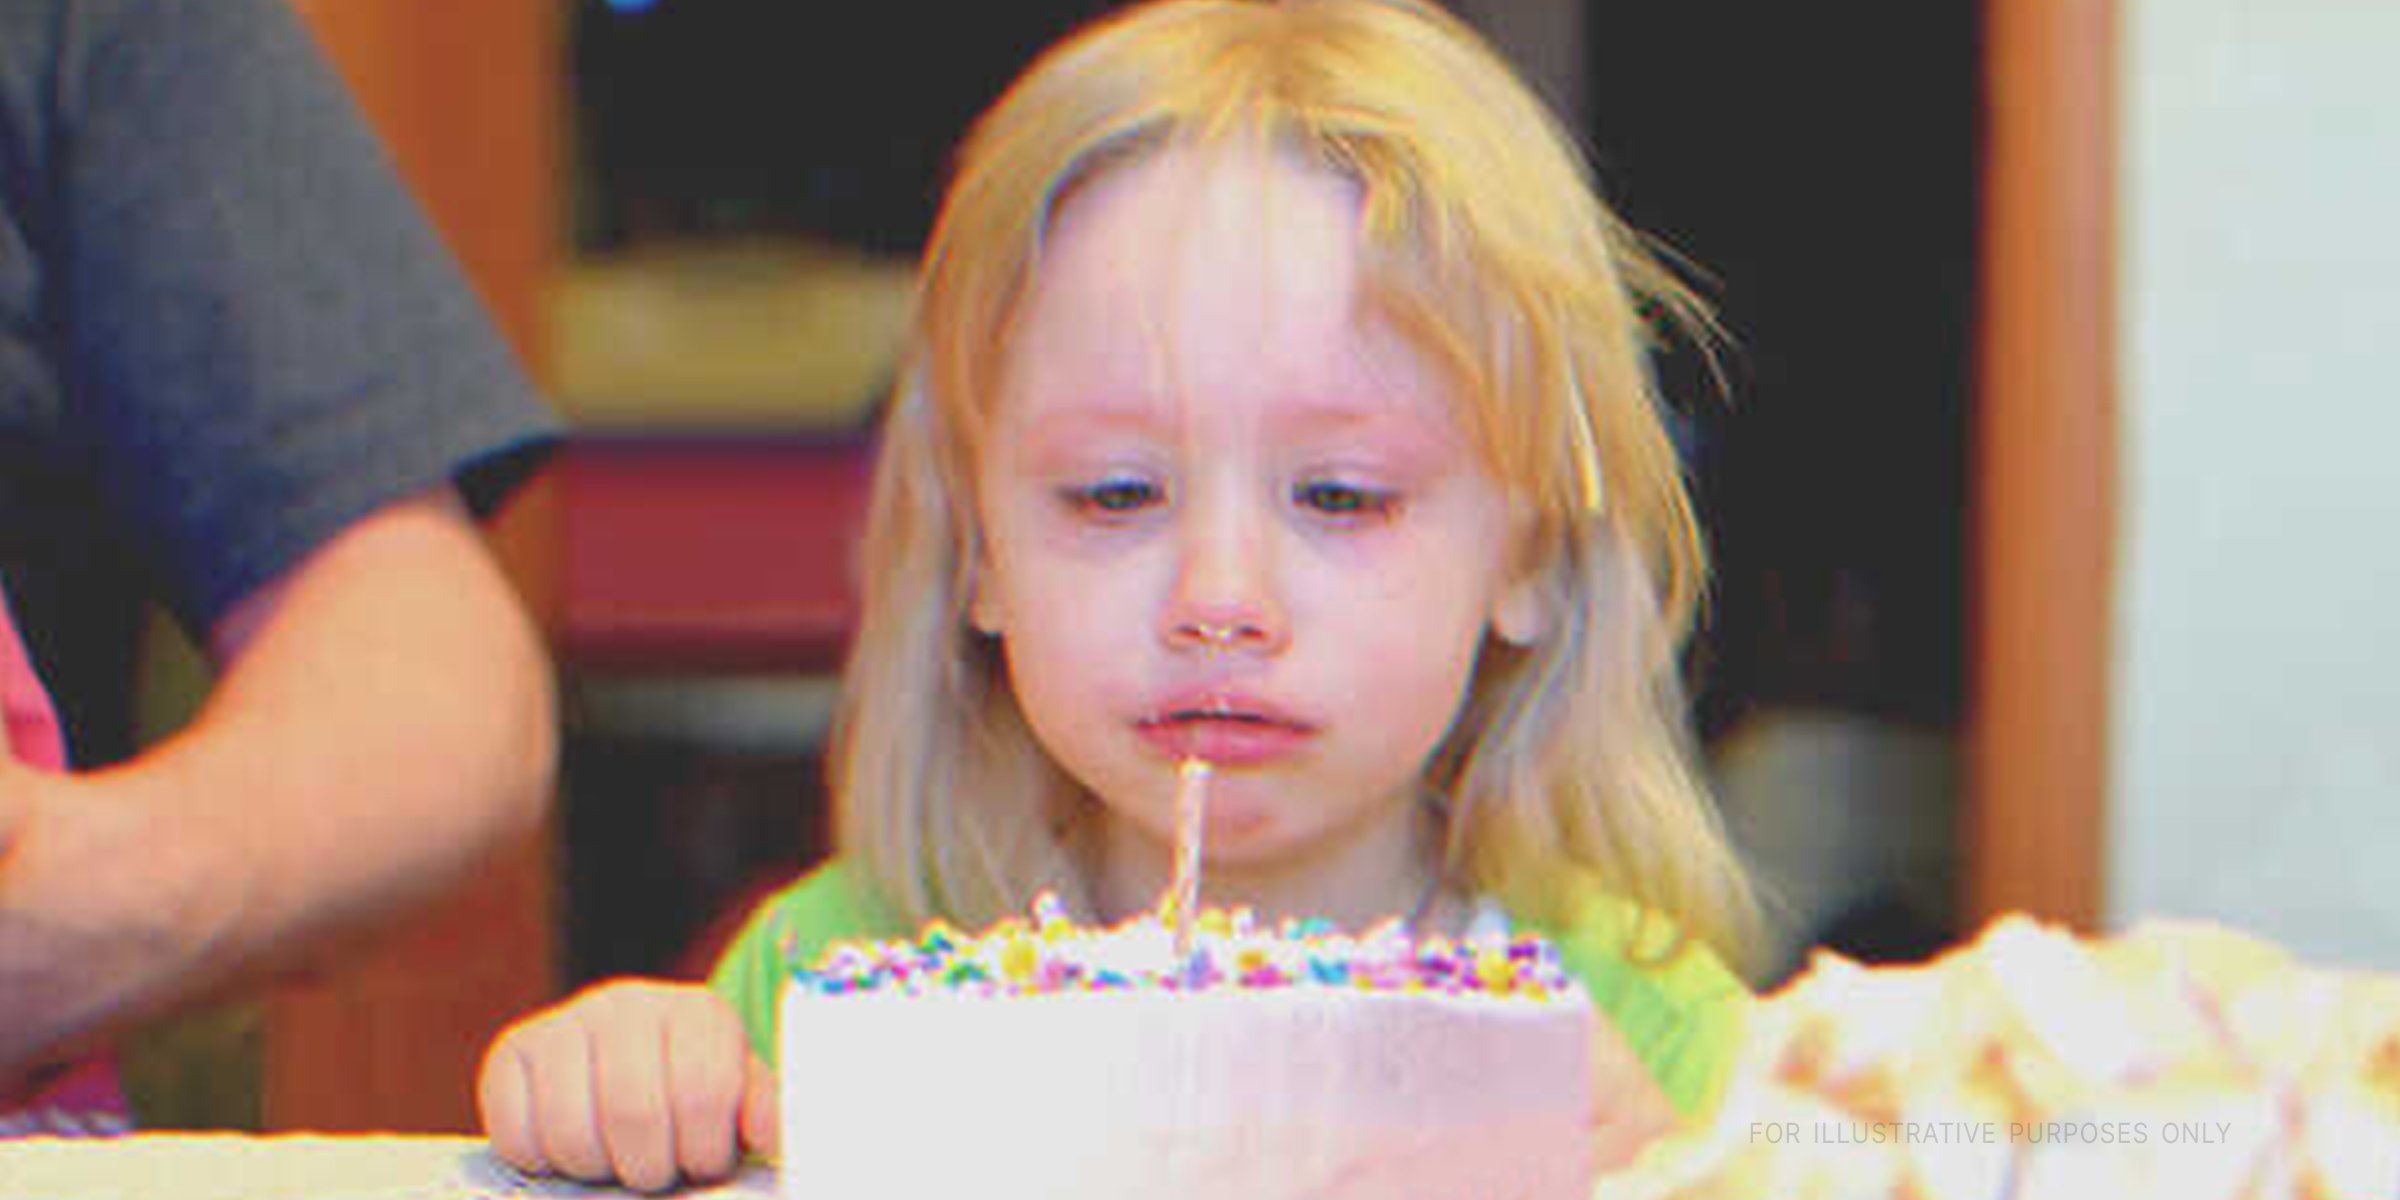 A girl crying in front of a birthday cake | Source: Shutterstock